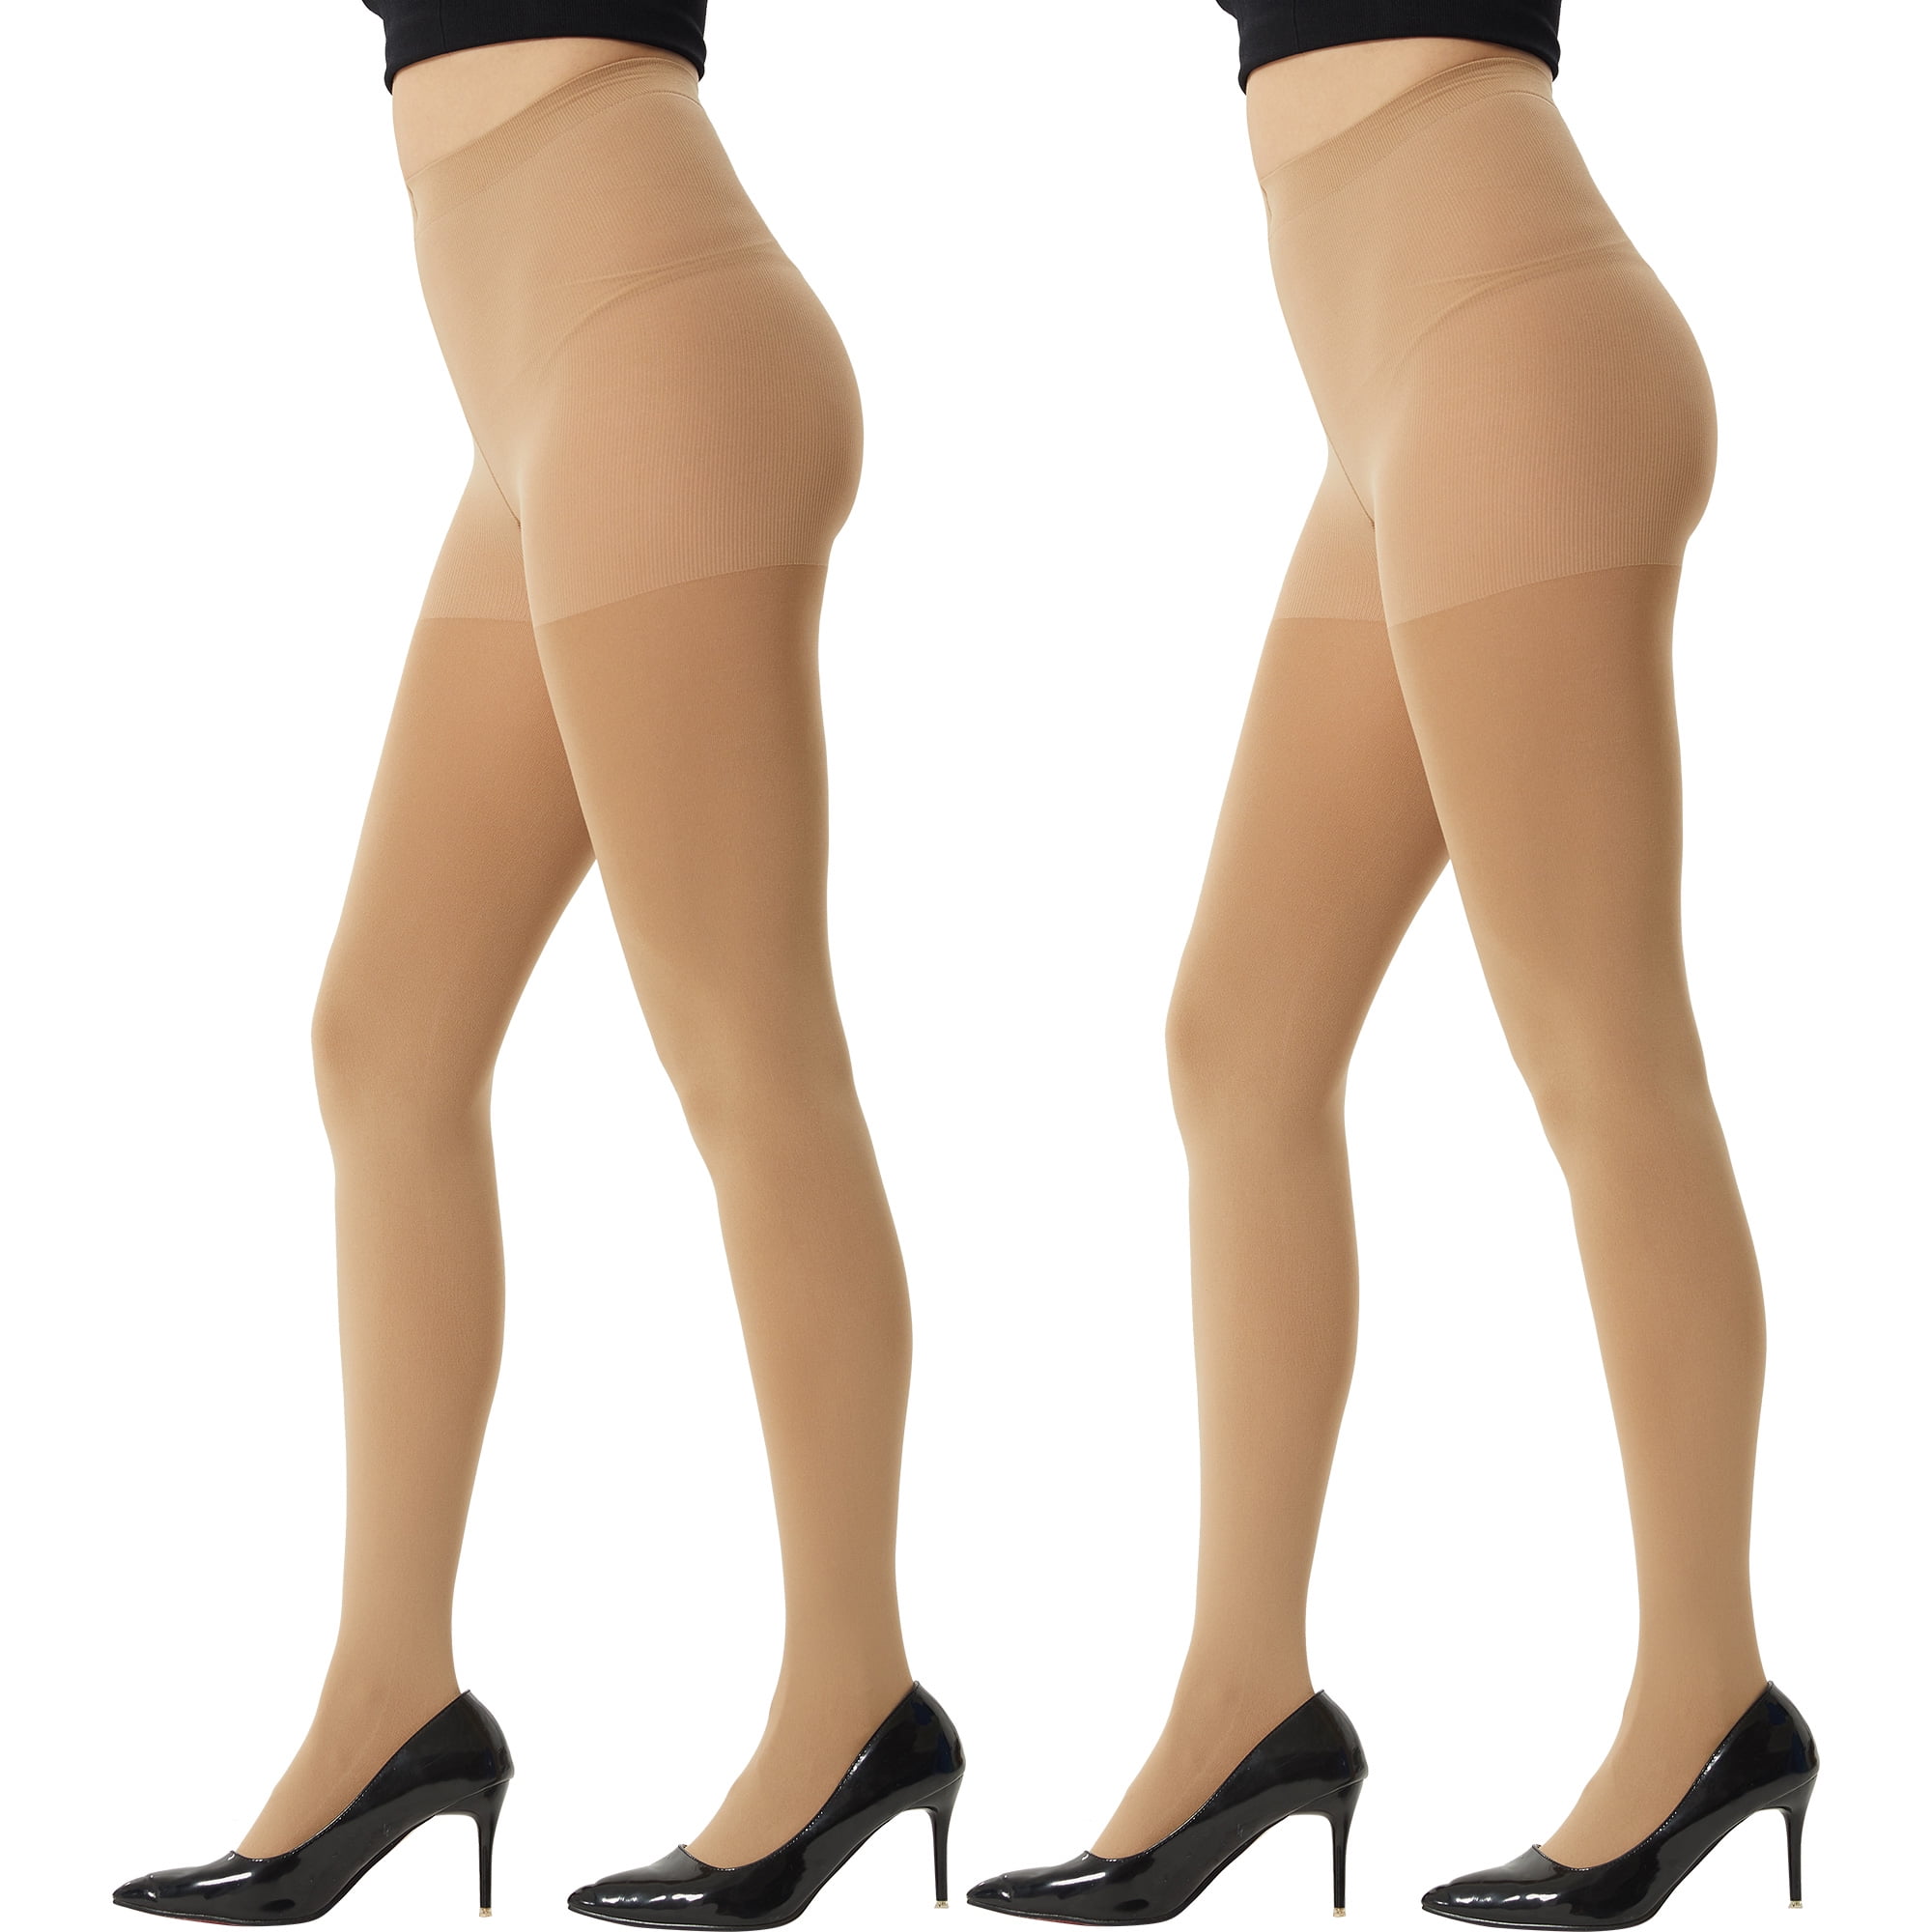 MANZI 2 Pairs 70 Denier Women's Plus Size Tights Stretch Opaque Control Top  Tights X-Large : : Fashion